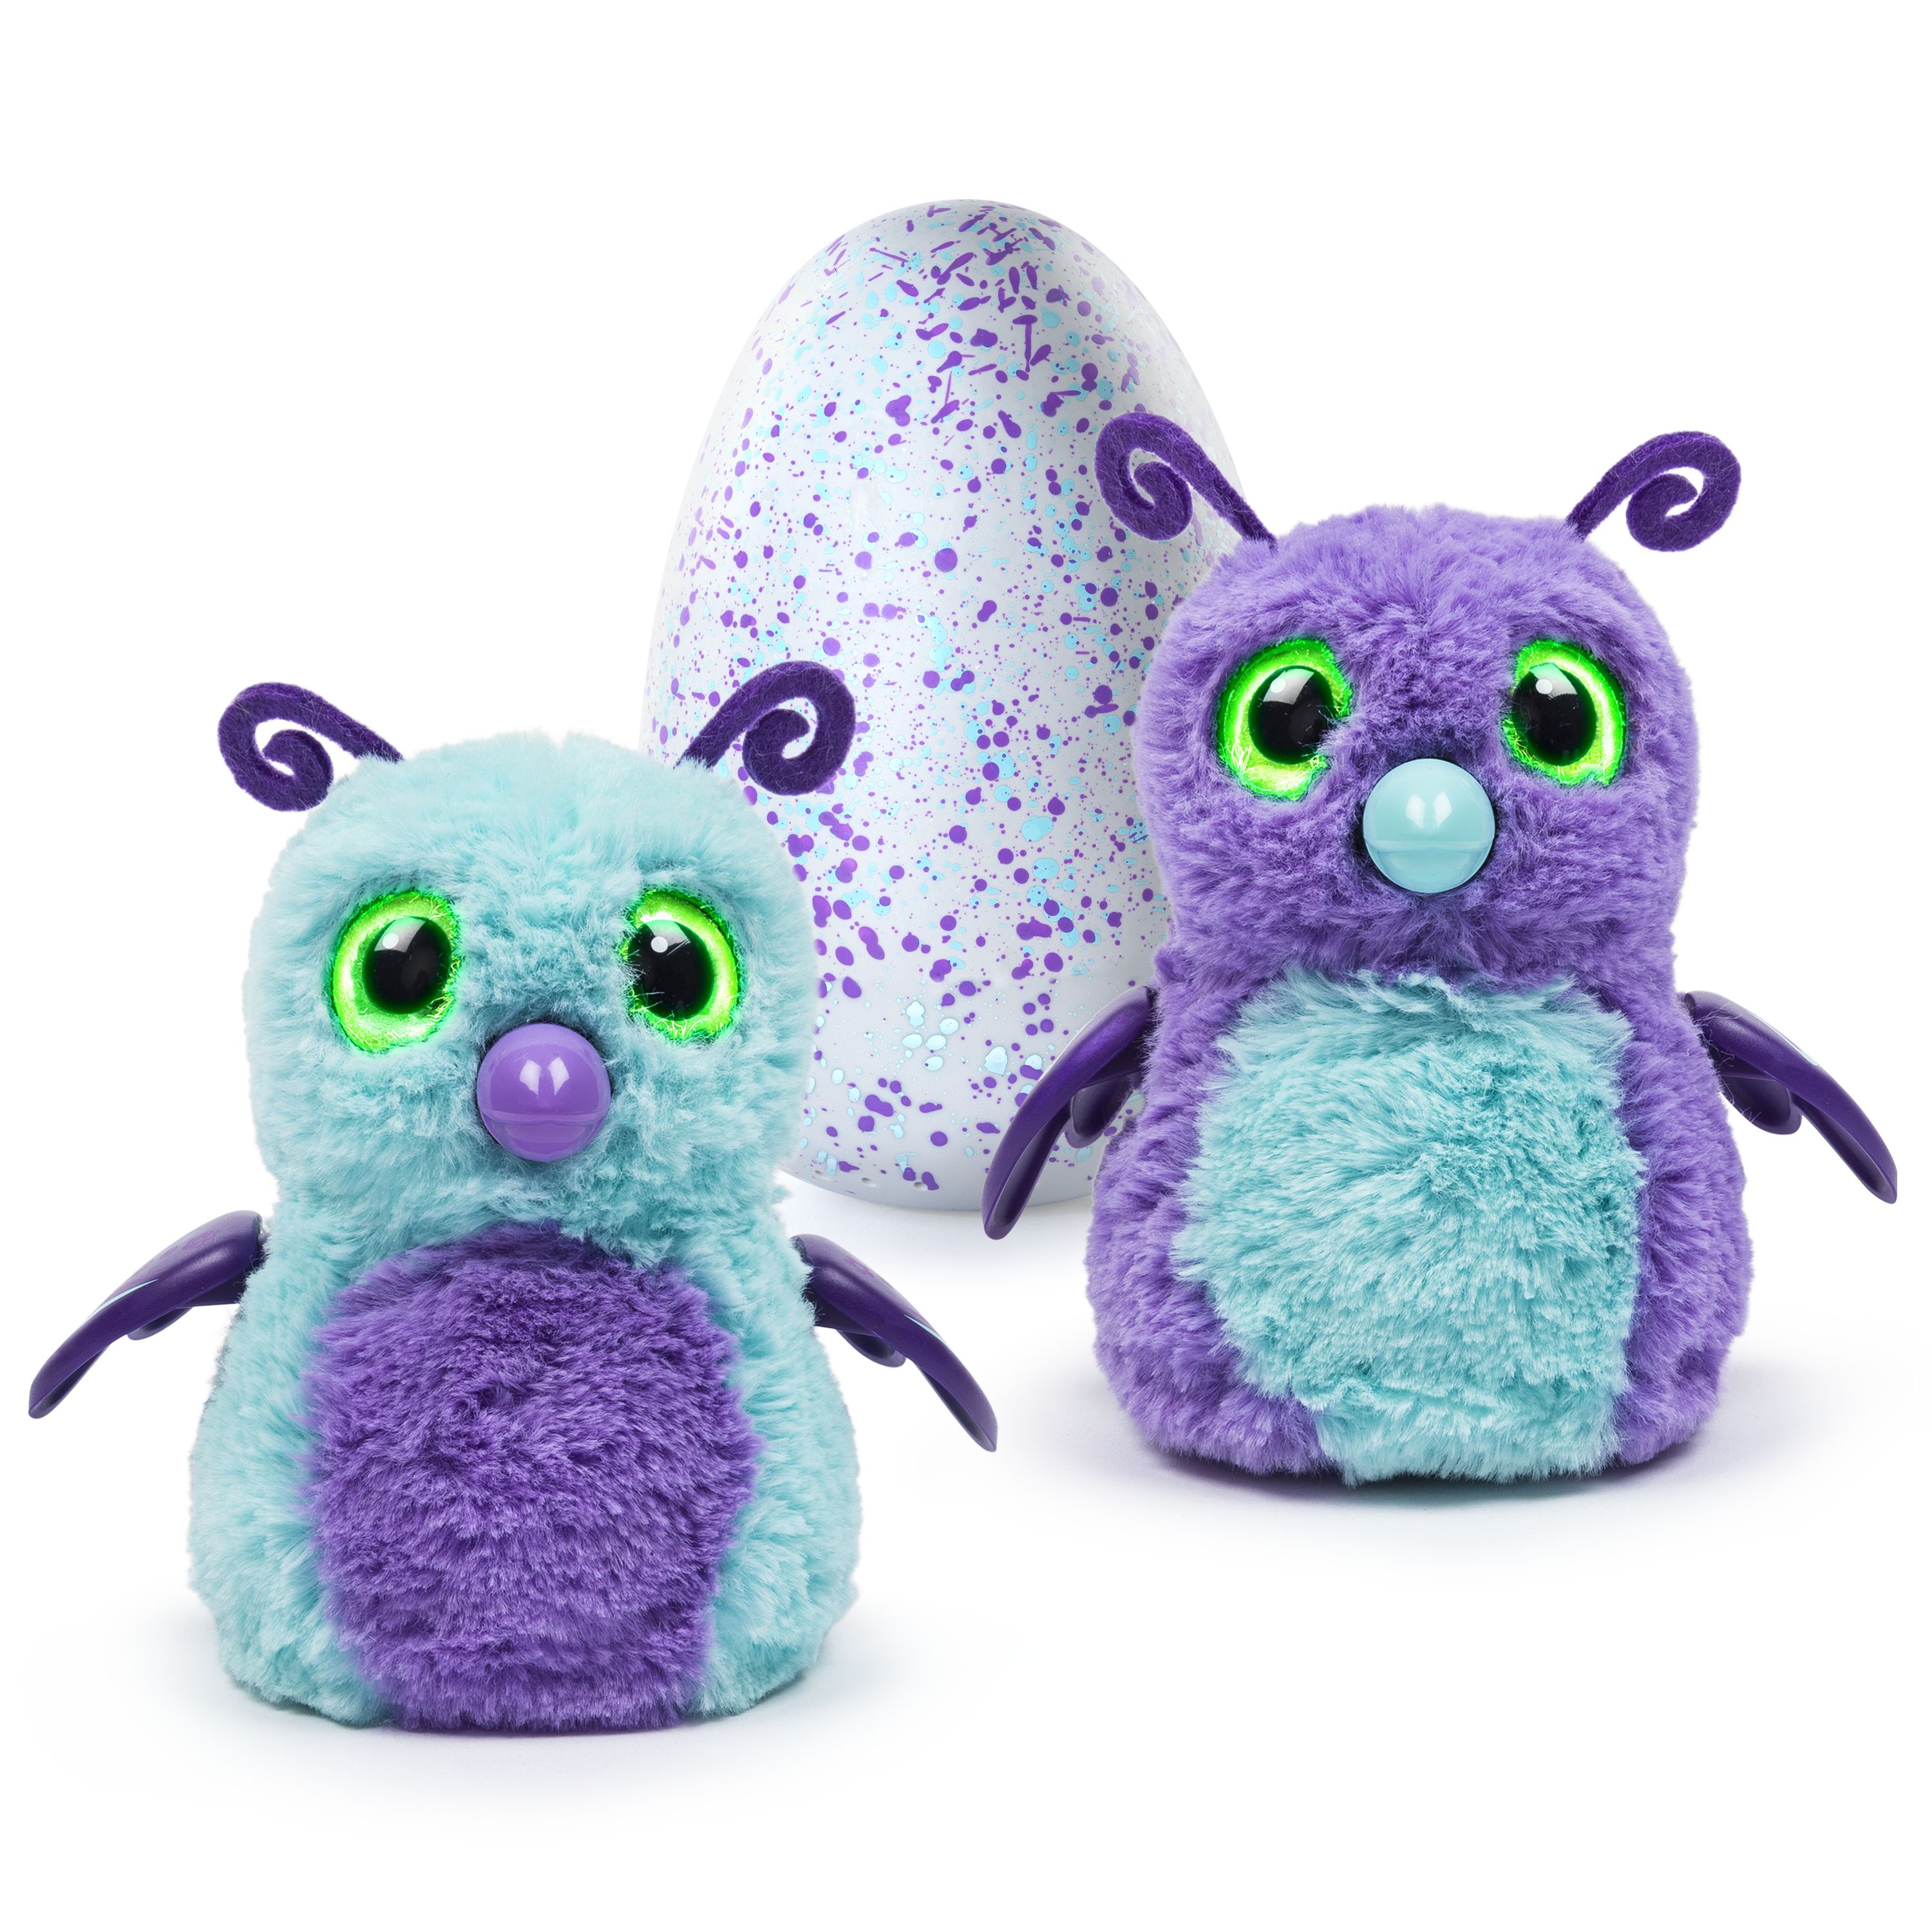 Hatchimals - Hatching Egg - Interactive Creature - Burtle - Purple/Teal Egg - Walmart Exclusive by Spin Master - image 1 of 7